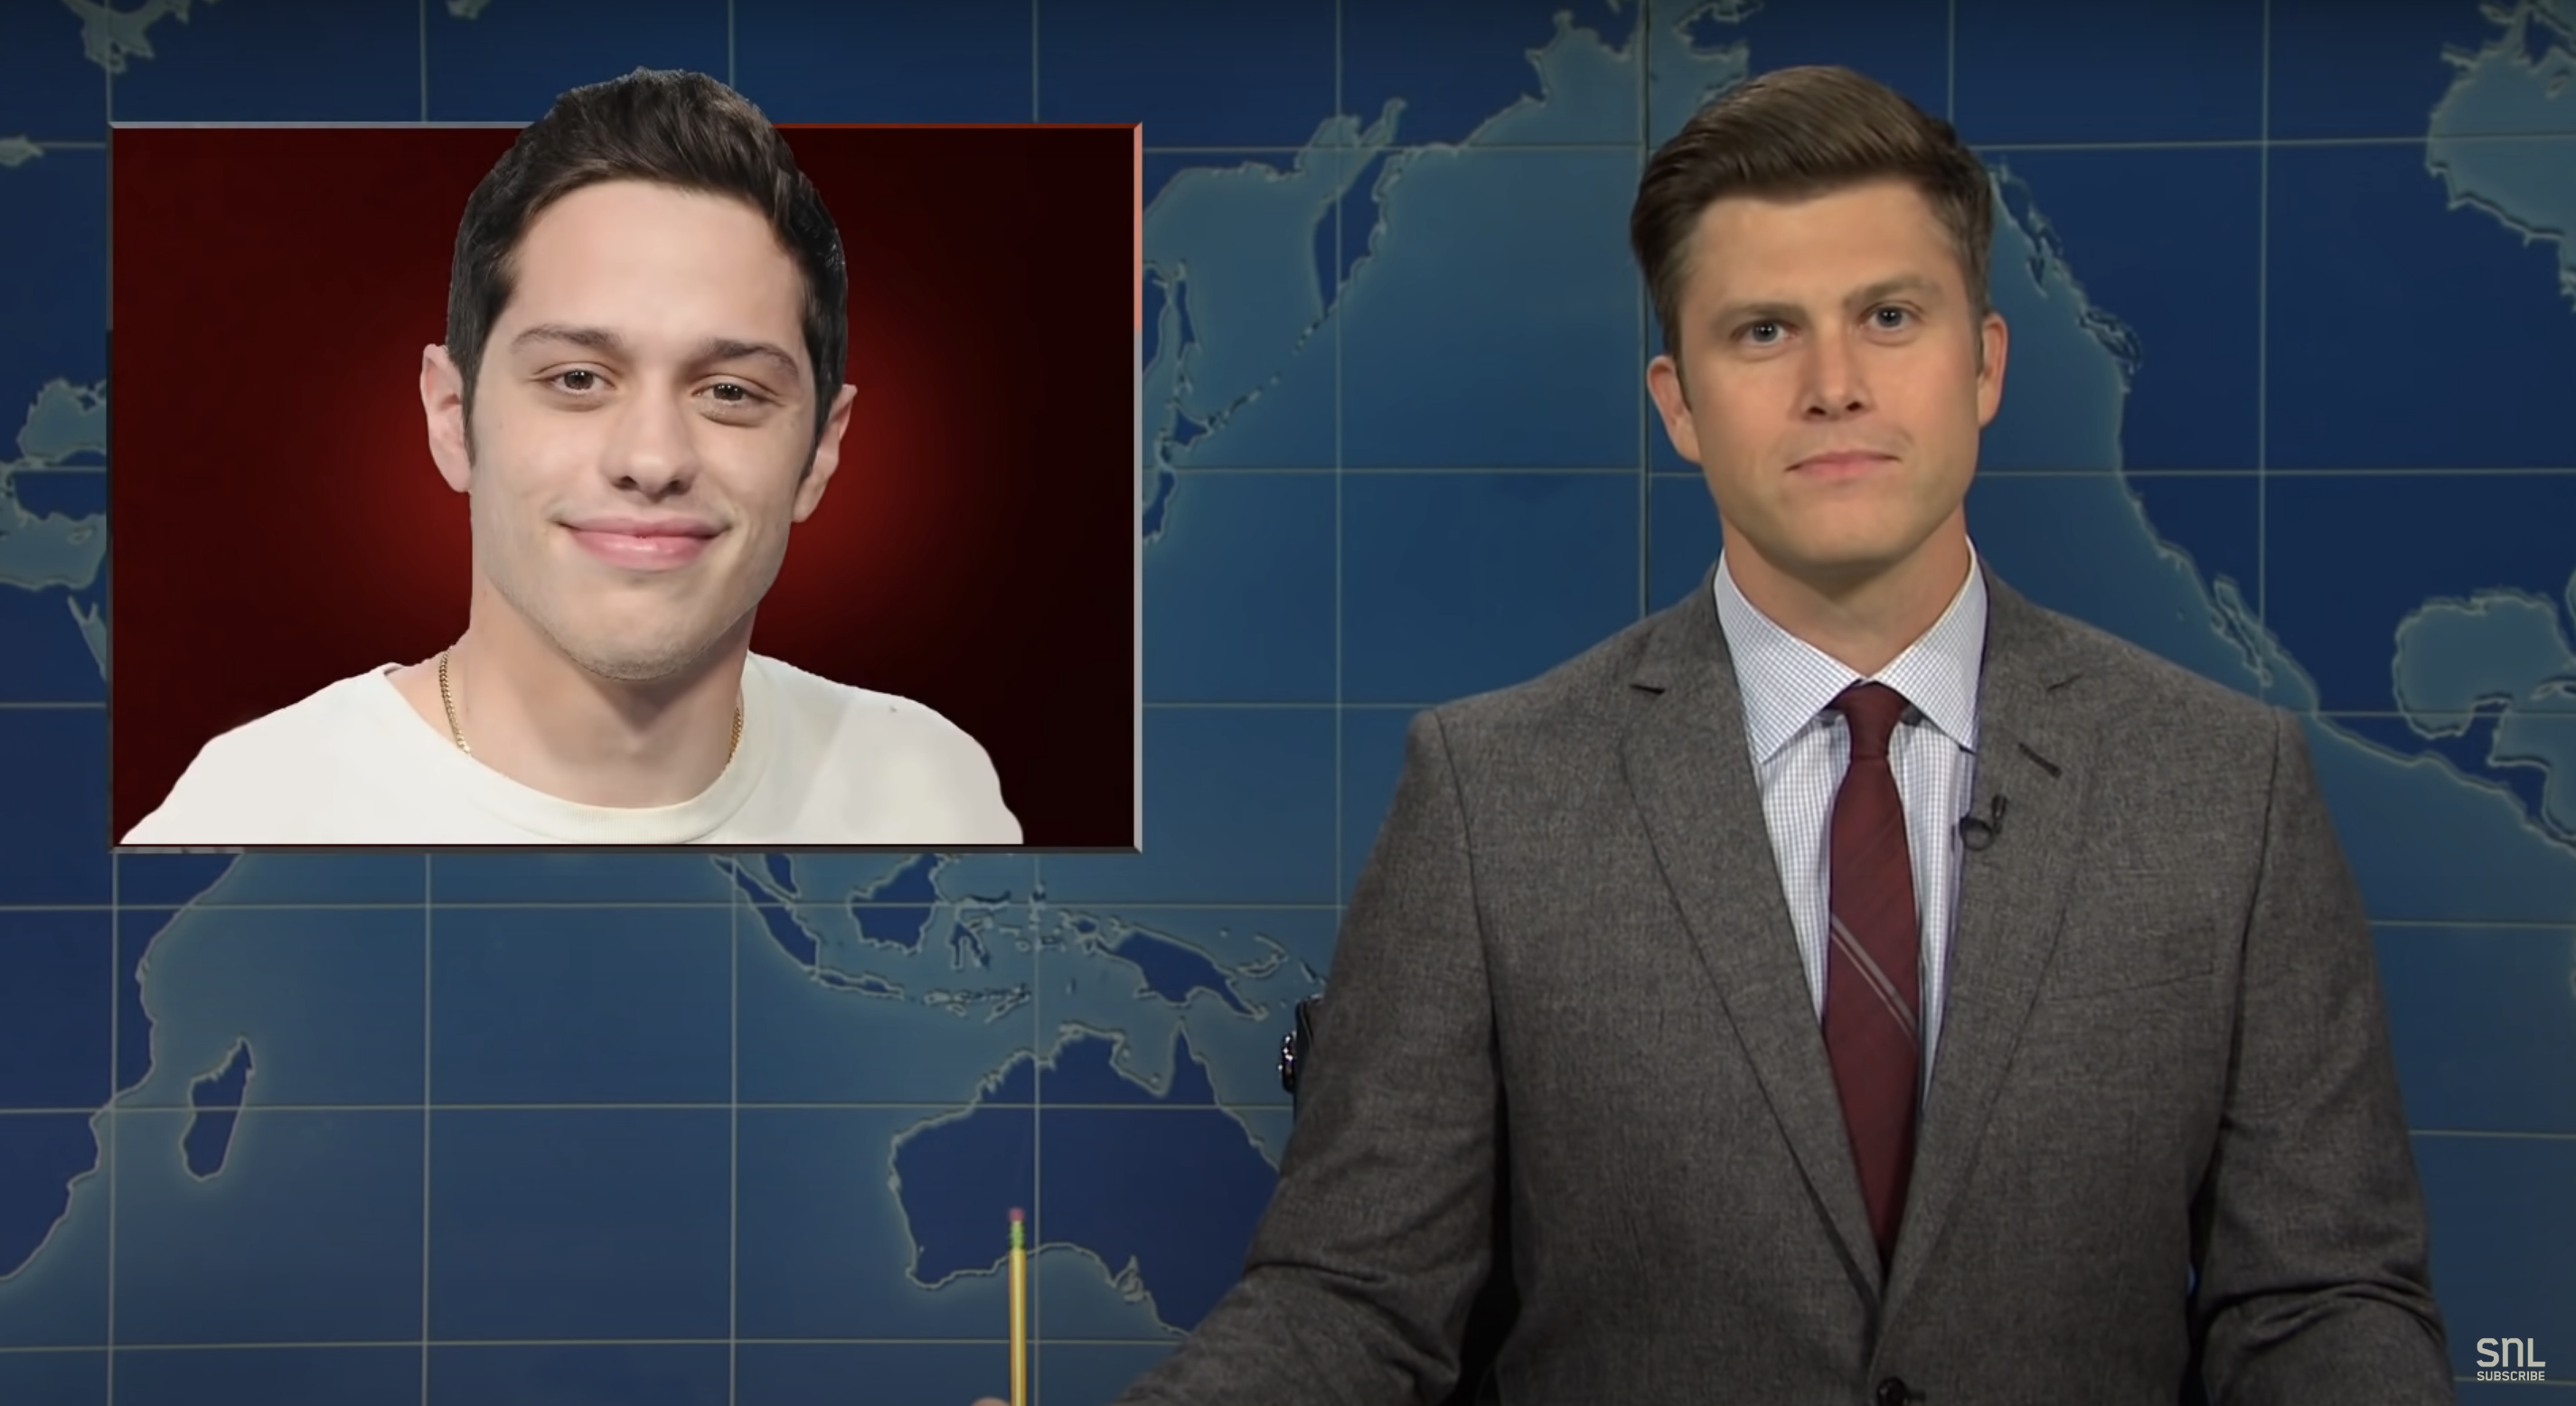 Pete’s photo used during the weekend update